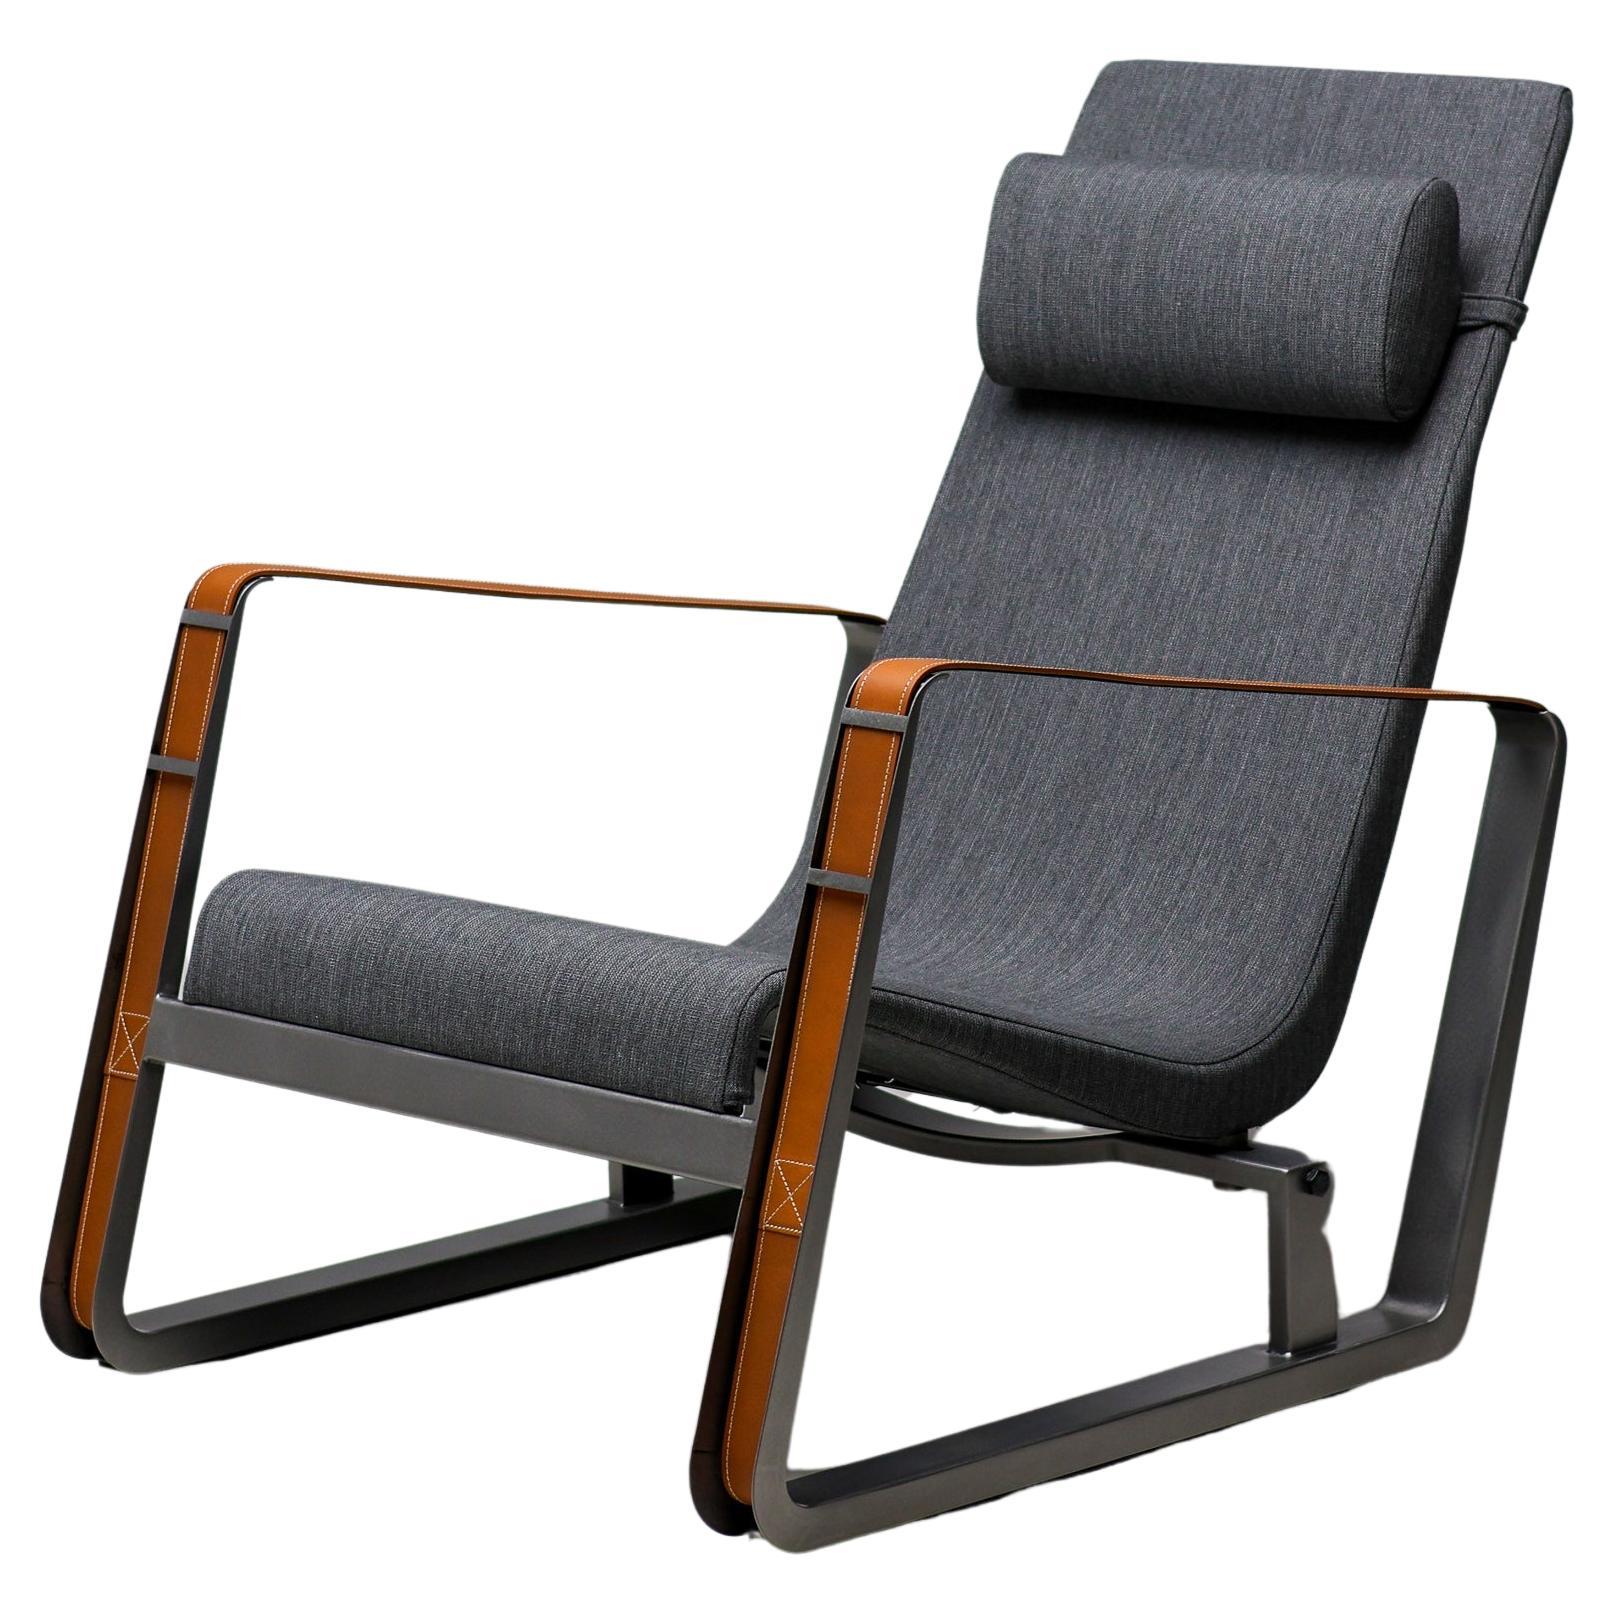 Limited Edition "Cité" Armchair RAW Steel by Jean Prouvé for Vitra